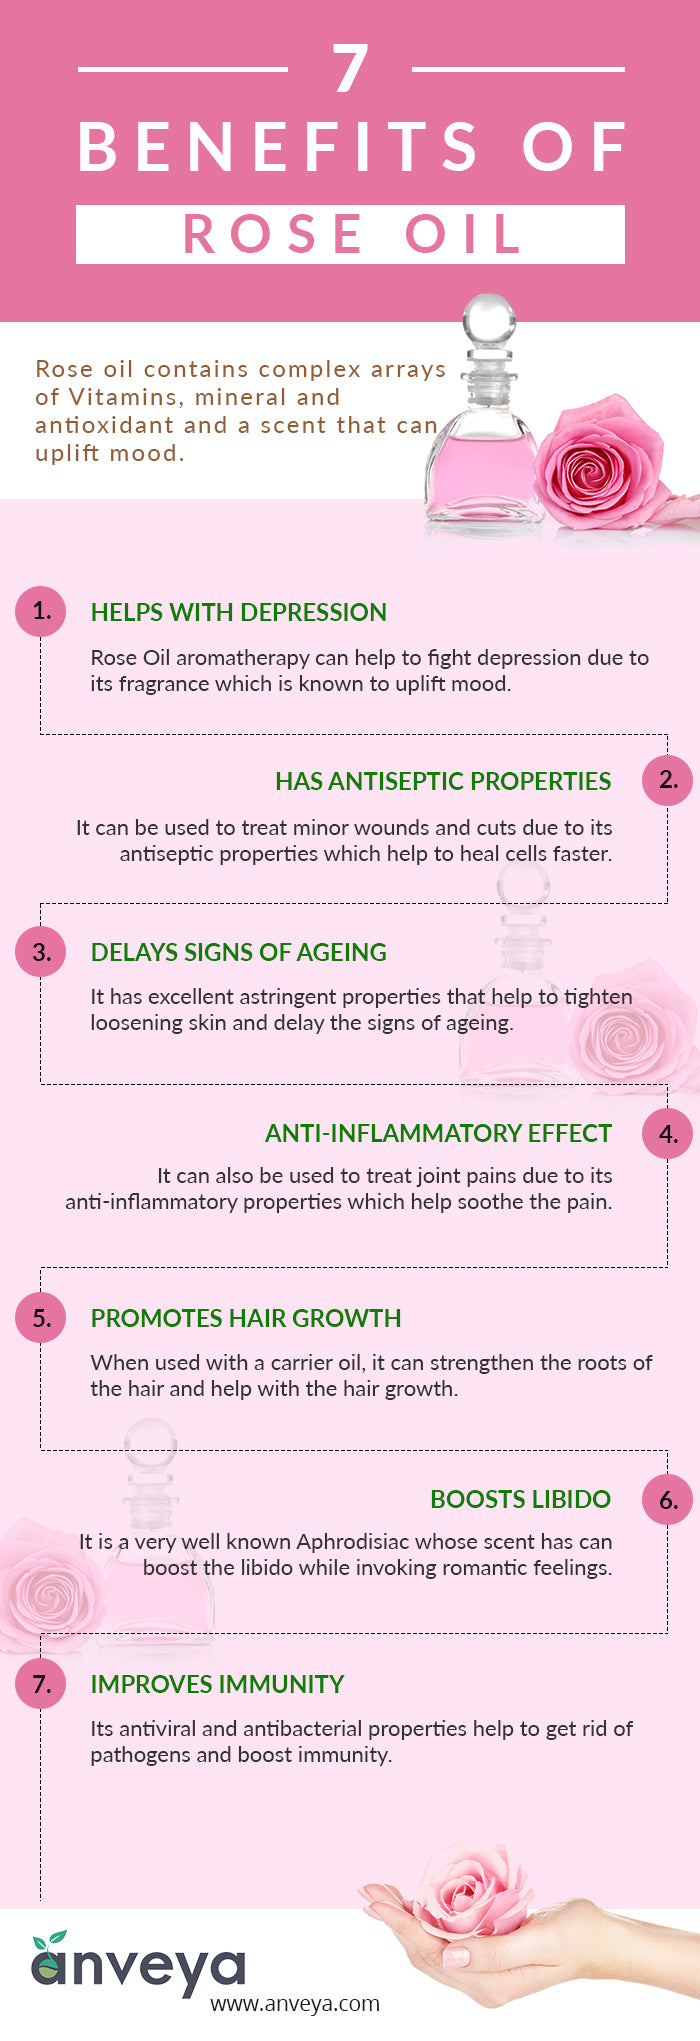 7 Benefits of Rose Oil